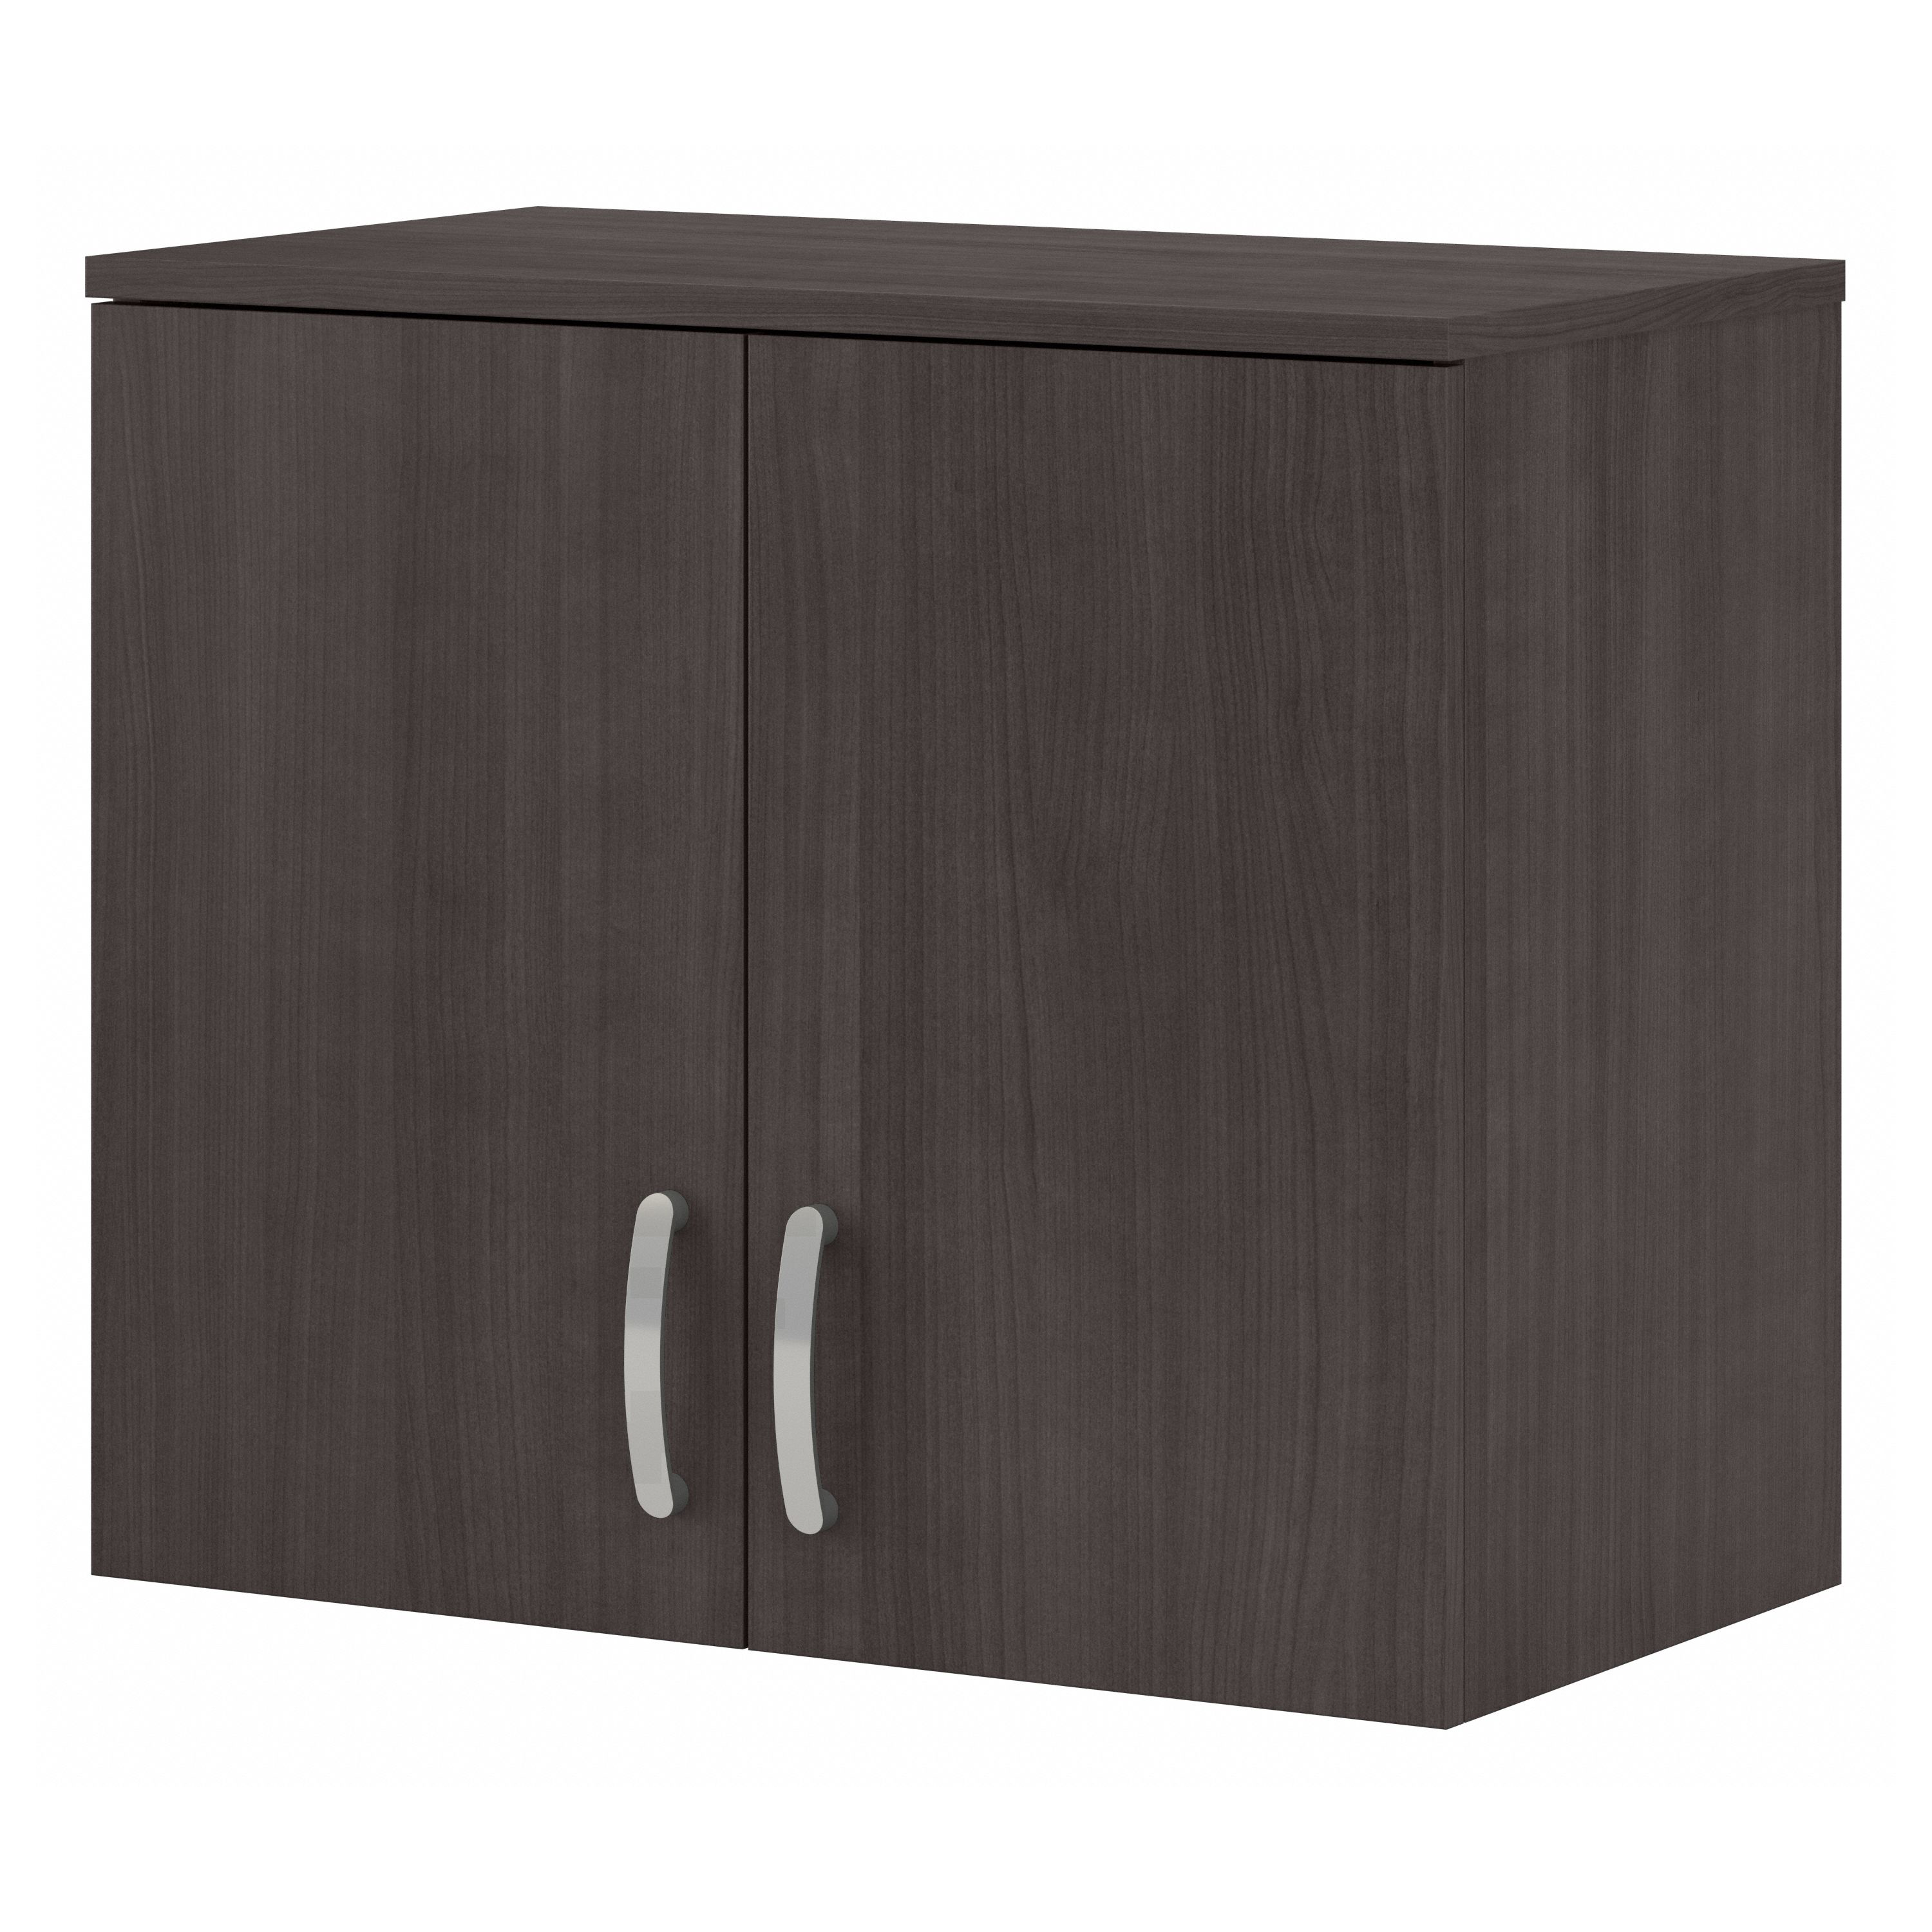 Shop Bush Business Furniture Universal Wall Cabinet with Doors and Shelves 02 UNS428SG #color_storm gray